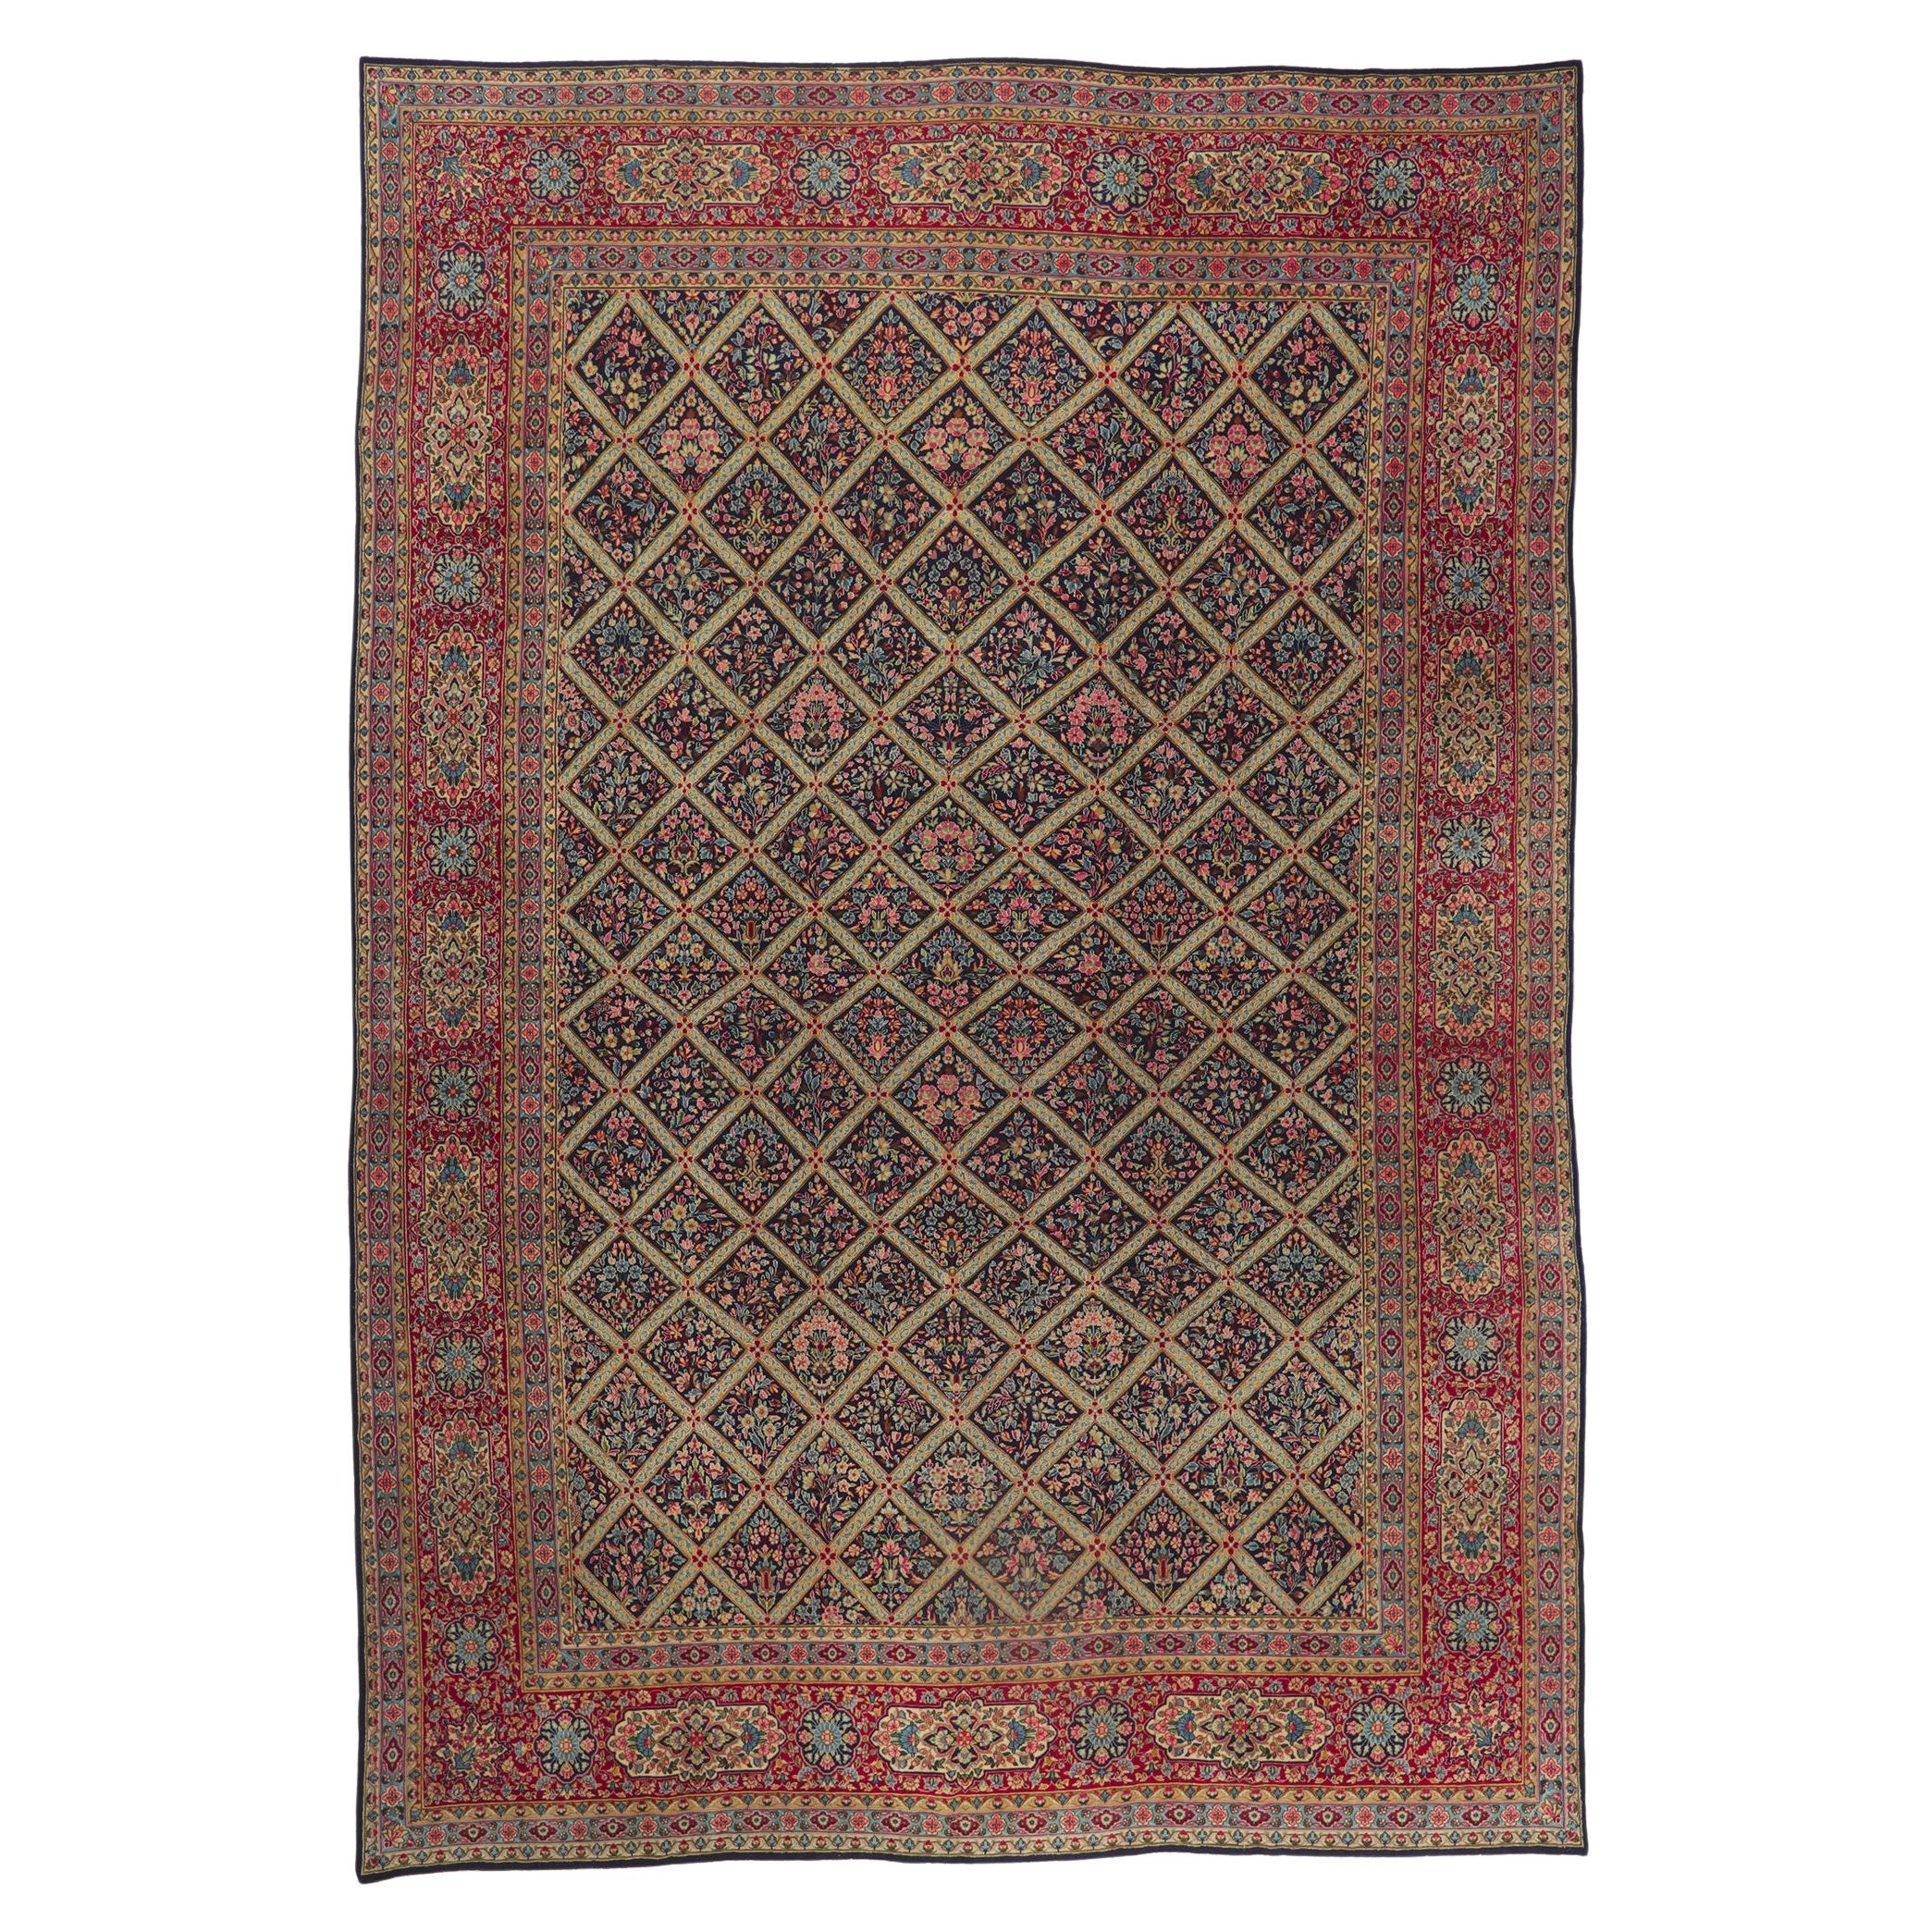 Oversized Antique Persian Kerman Rug Hotel Lobby Size Carpet For Sale